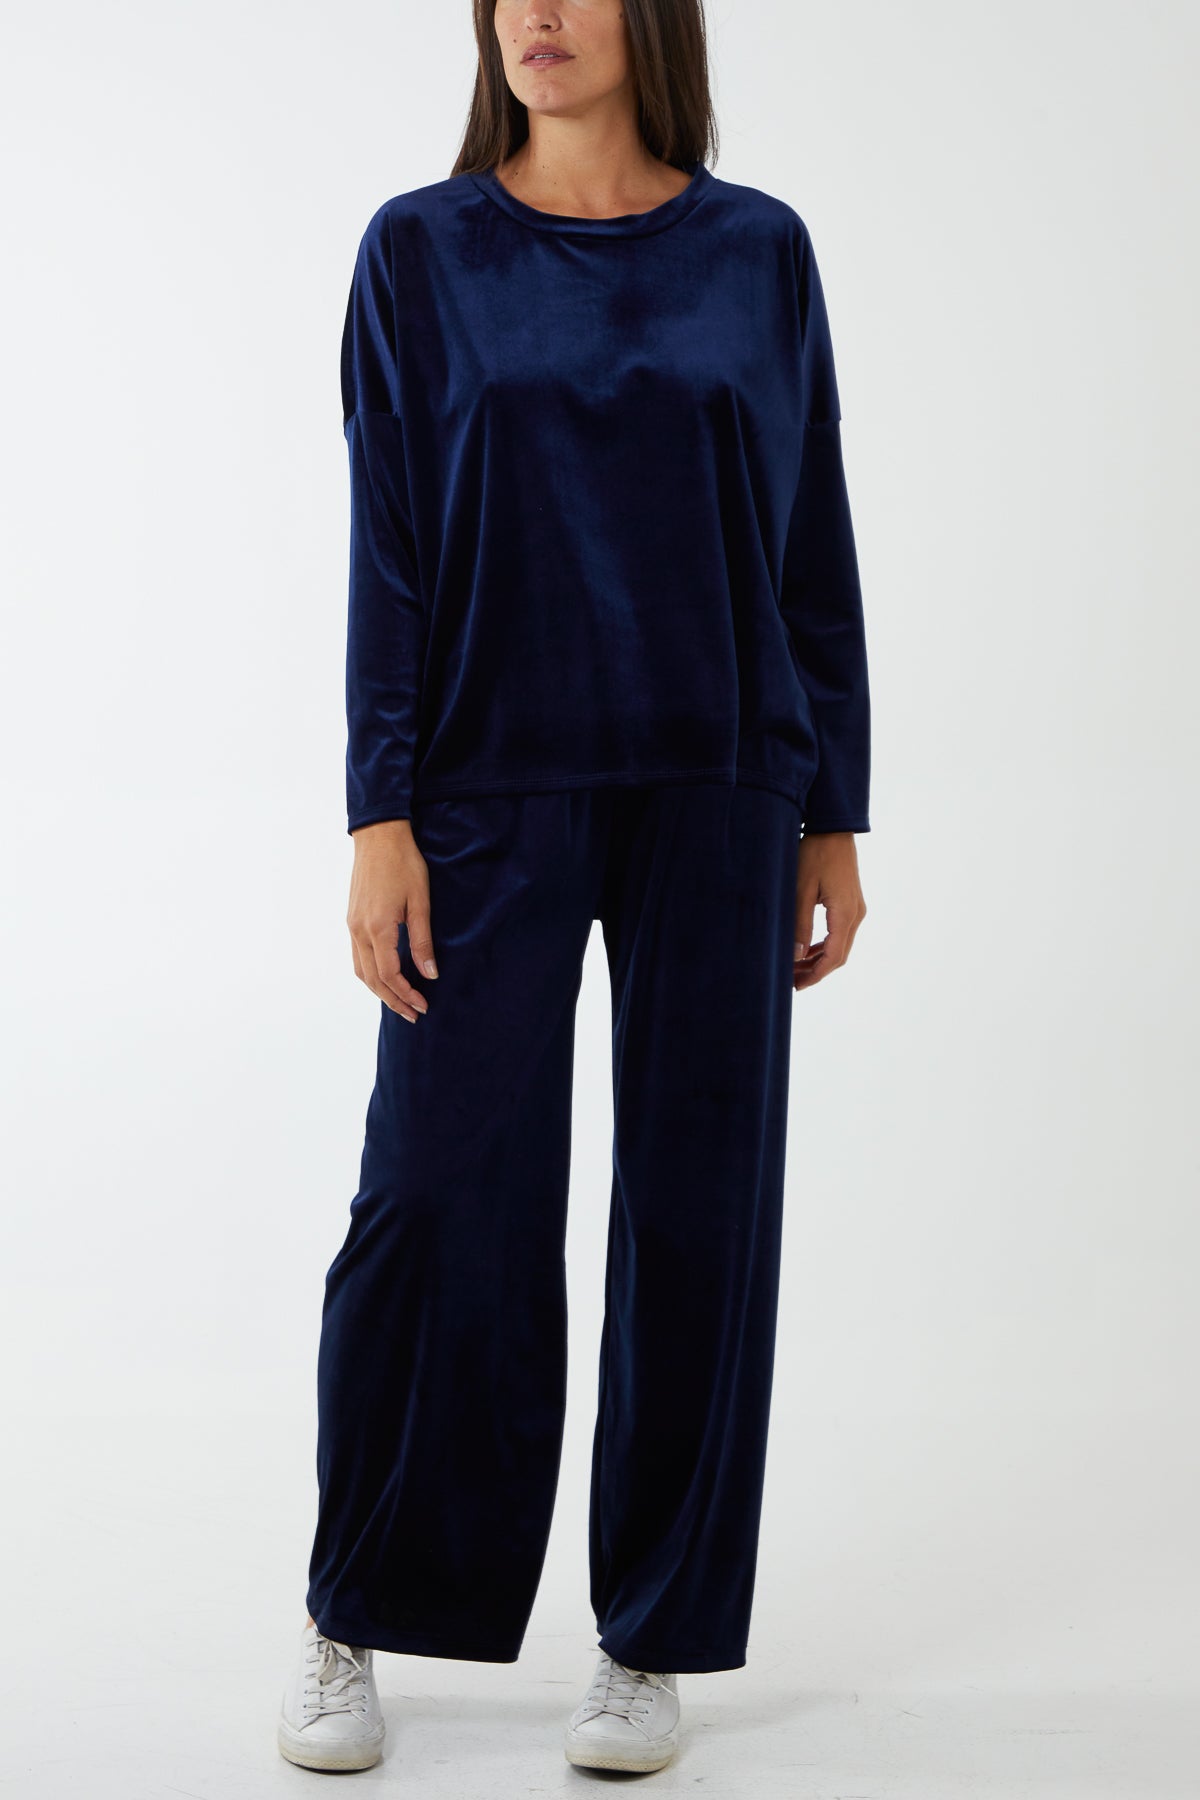 Velour Relaxed Fit Top & Bottom Loungewear Set